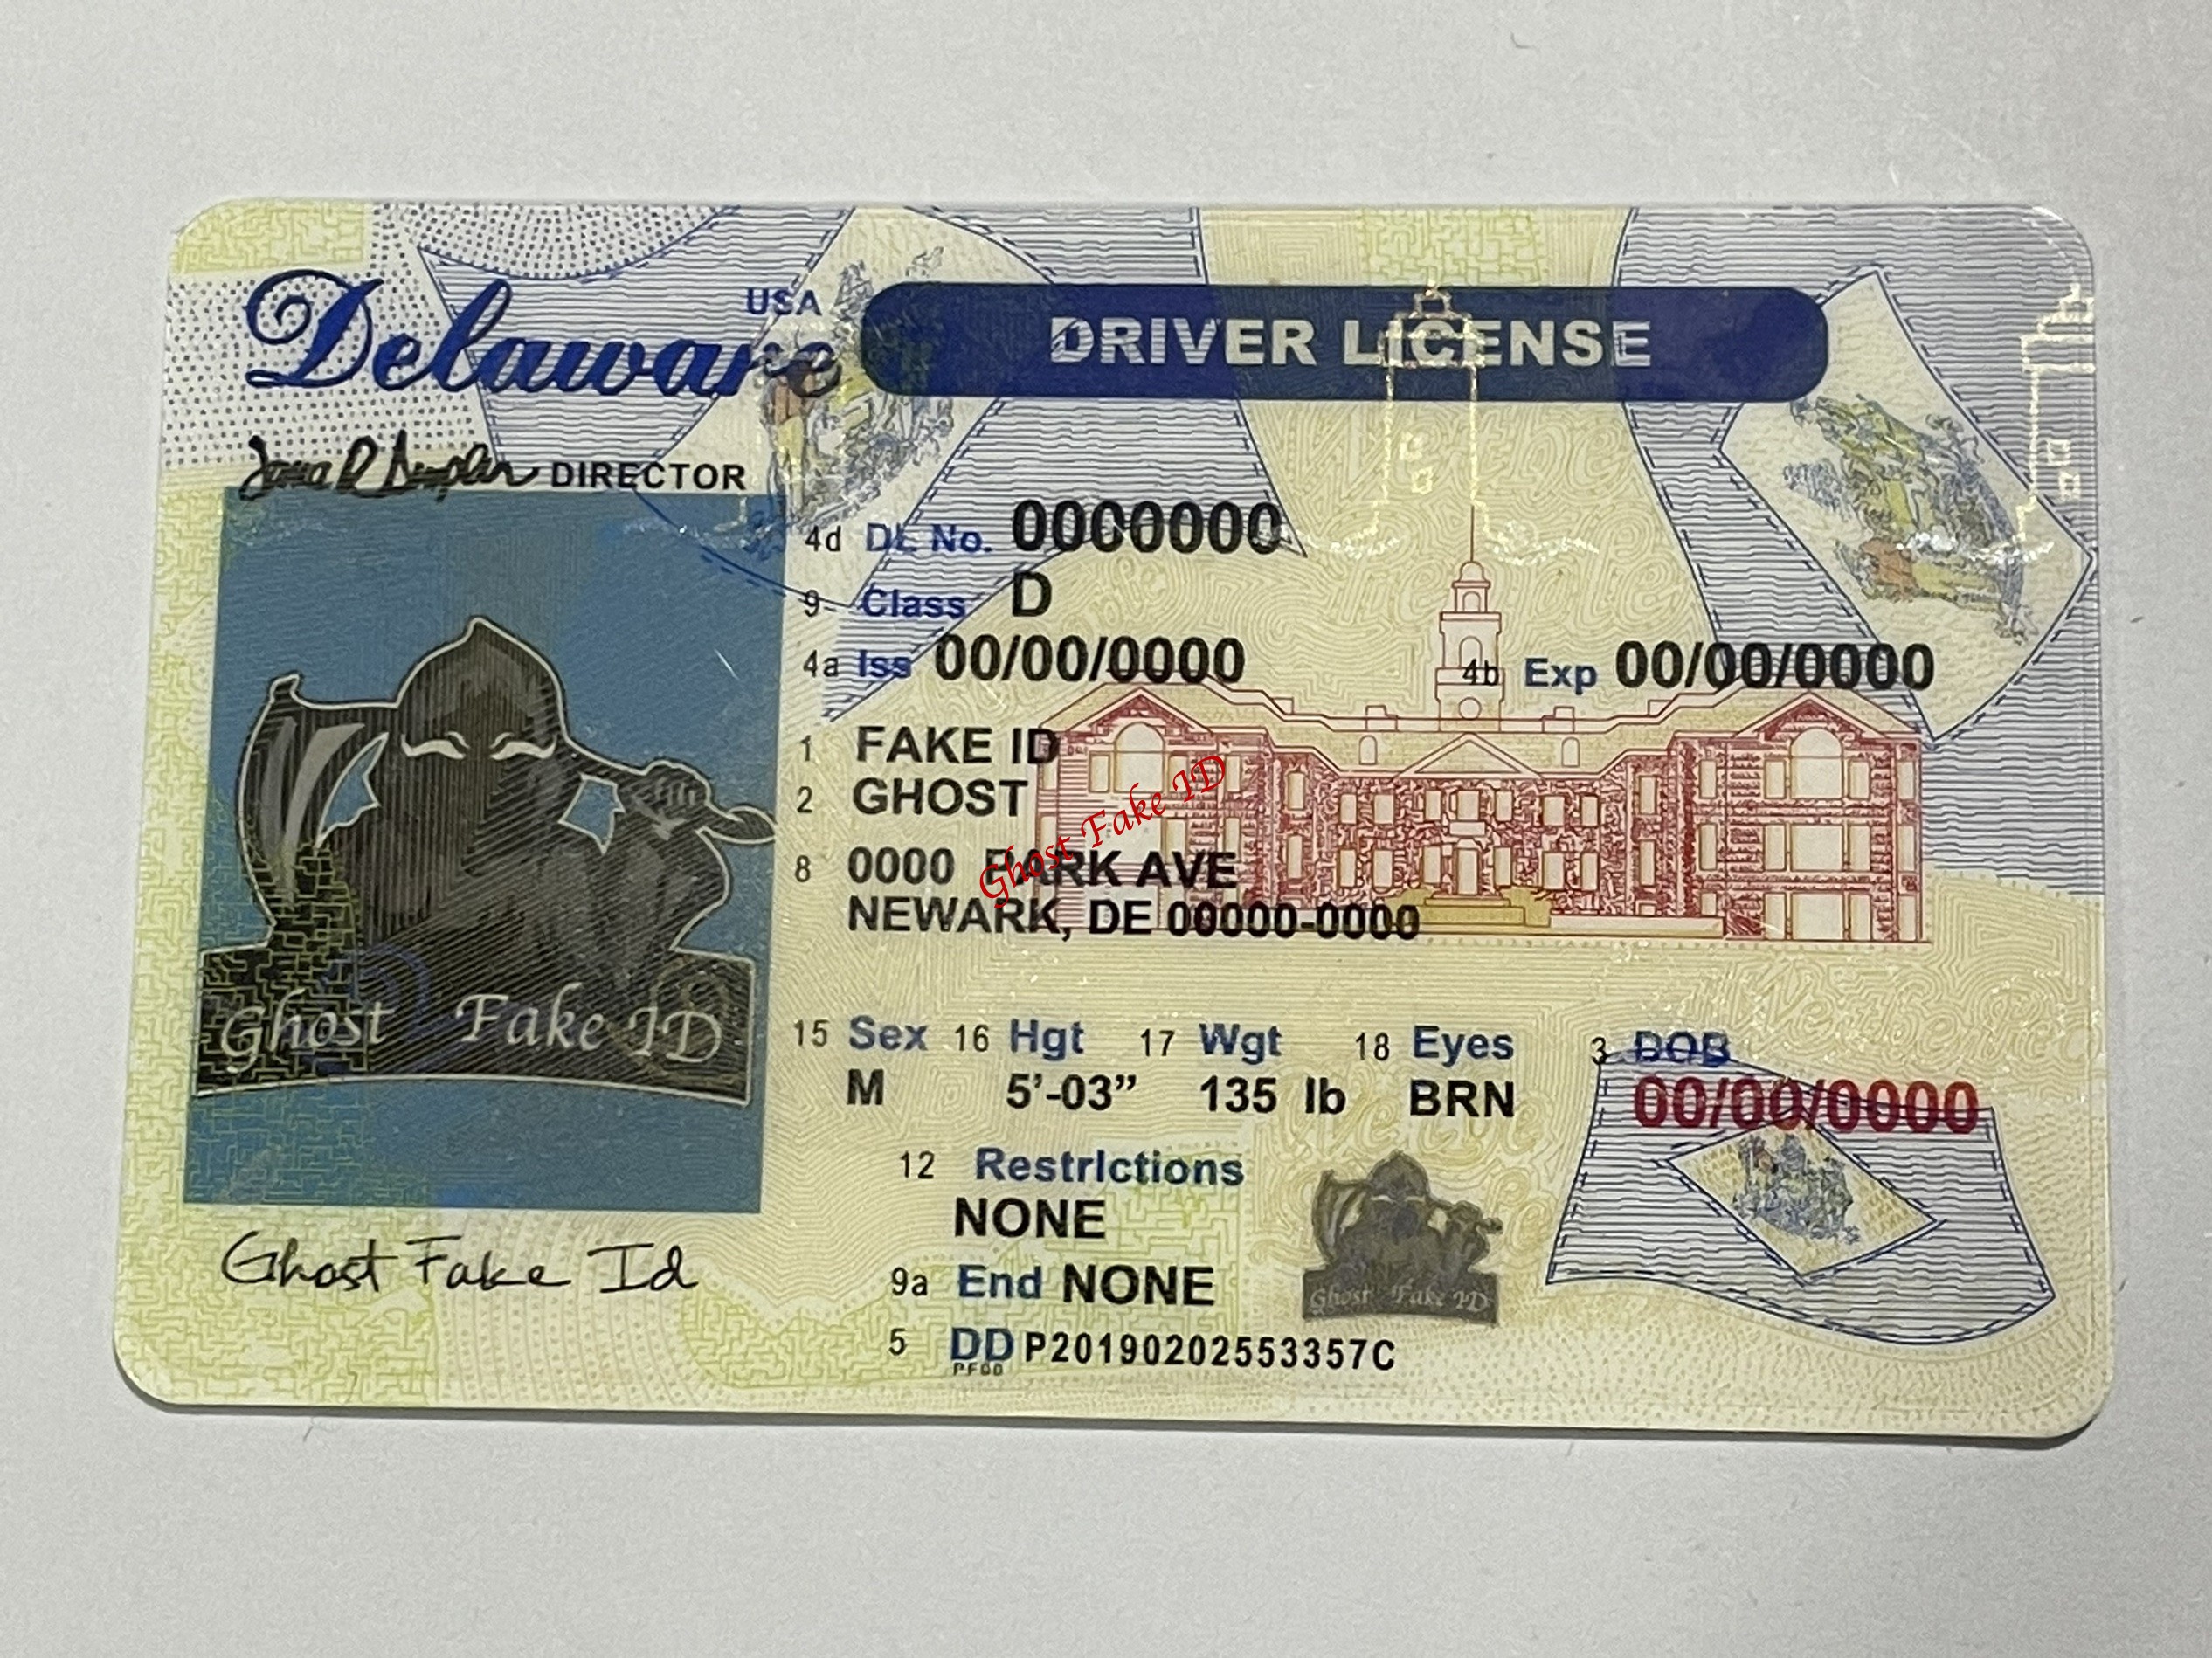 Delaware - Scanable fake id